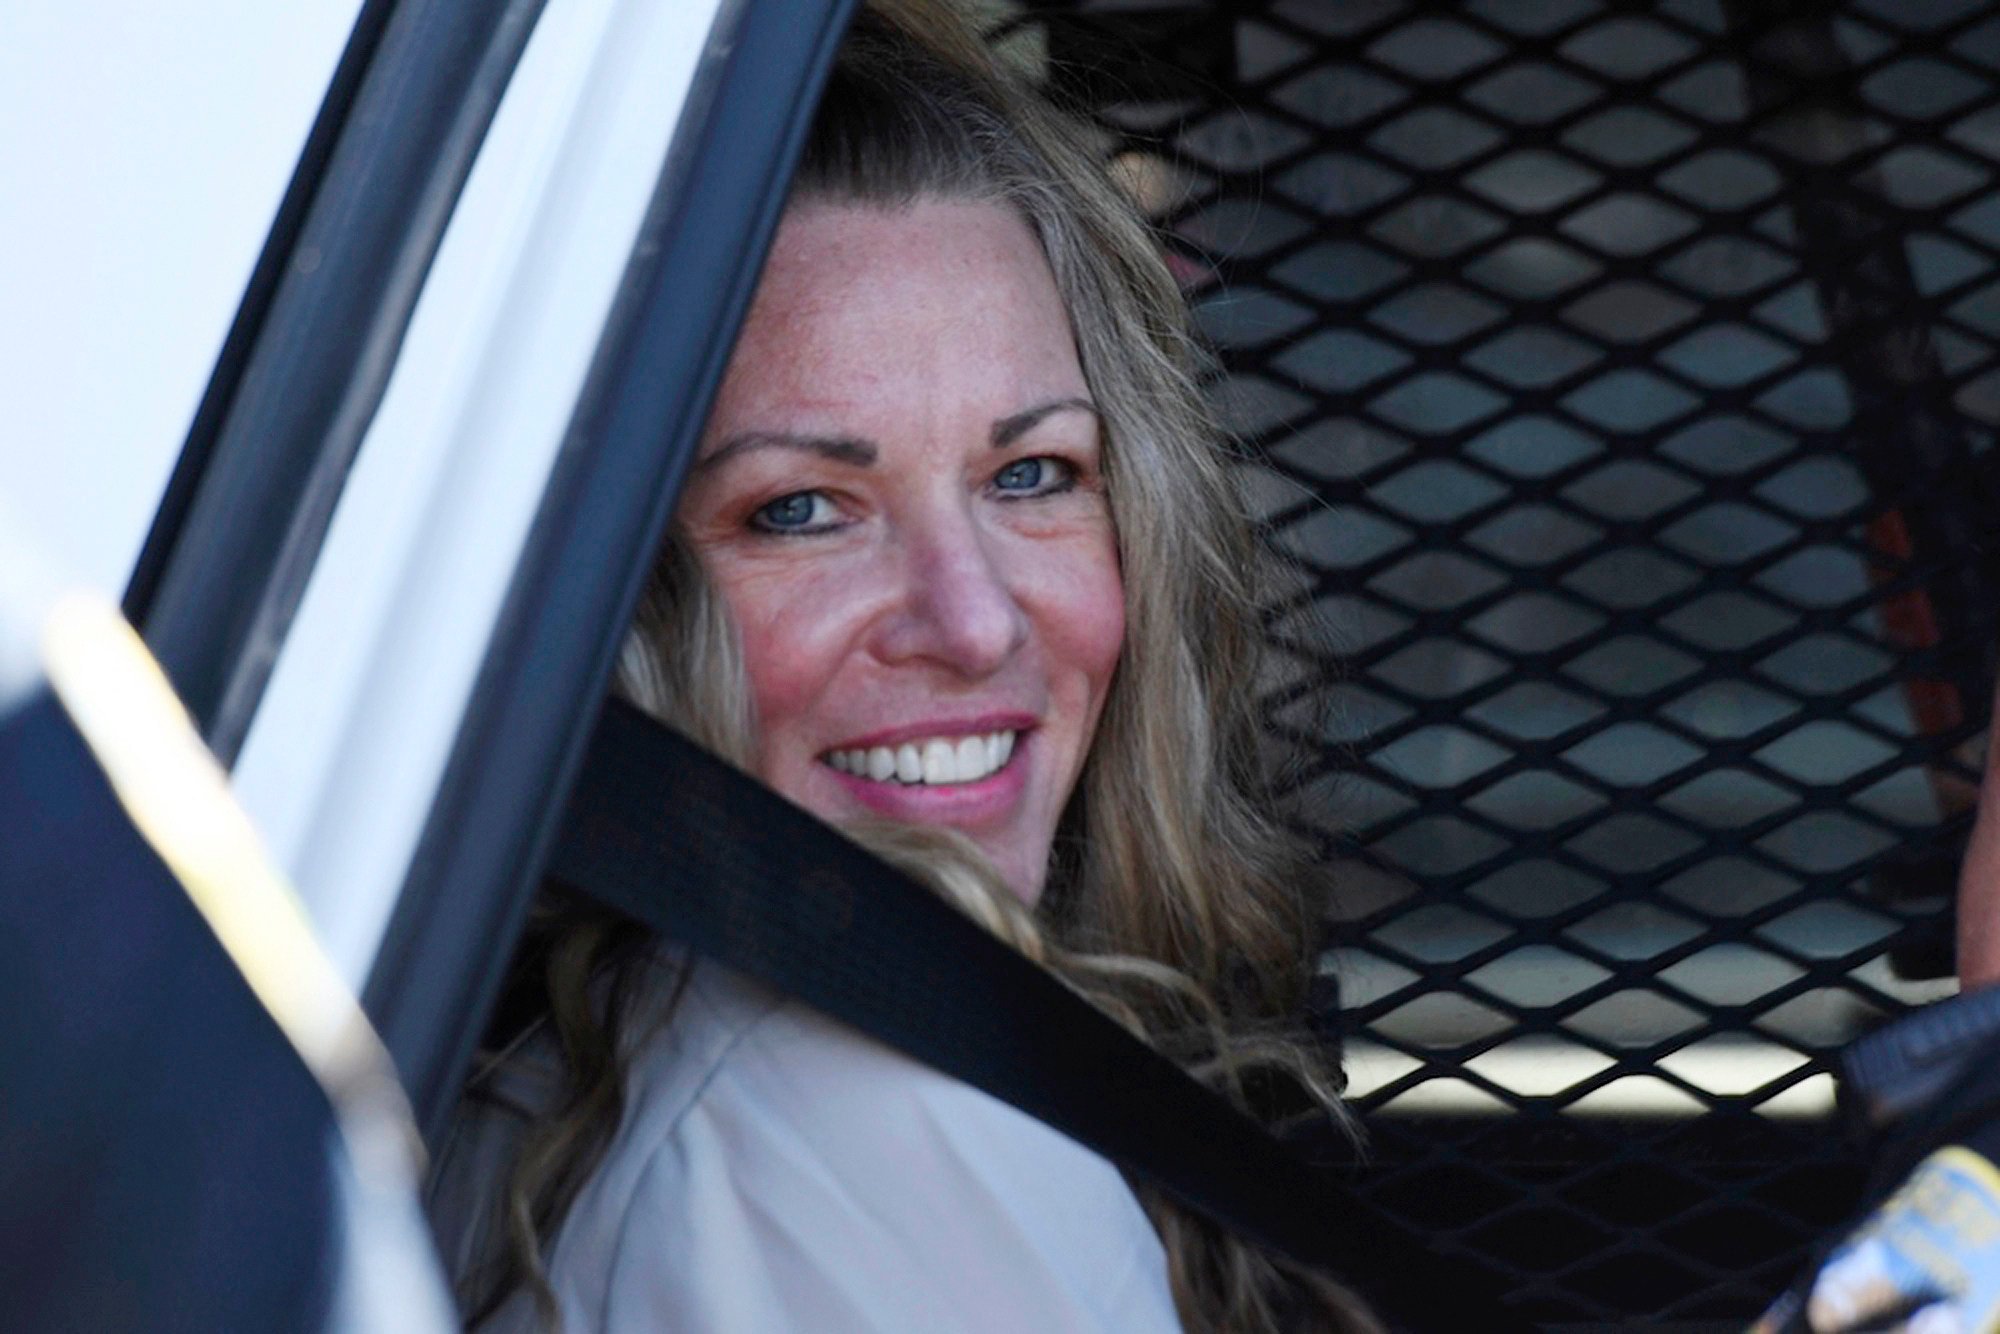 Lori Vallow Daybell, a mother accused of conspiring with her husband to kill her two children, sits in a police car after a hearing at the Fremont County Courthouse in St Anthony, Idaho, on August 16. Photo: AP